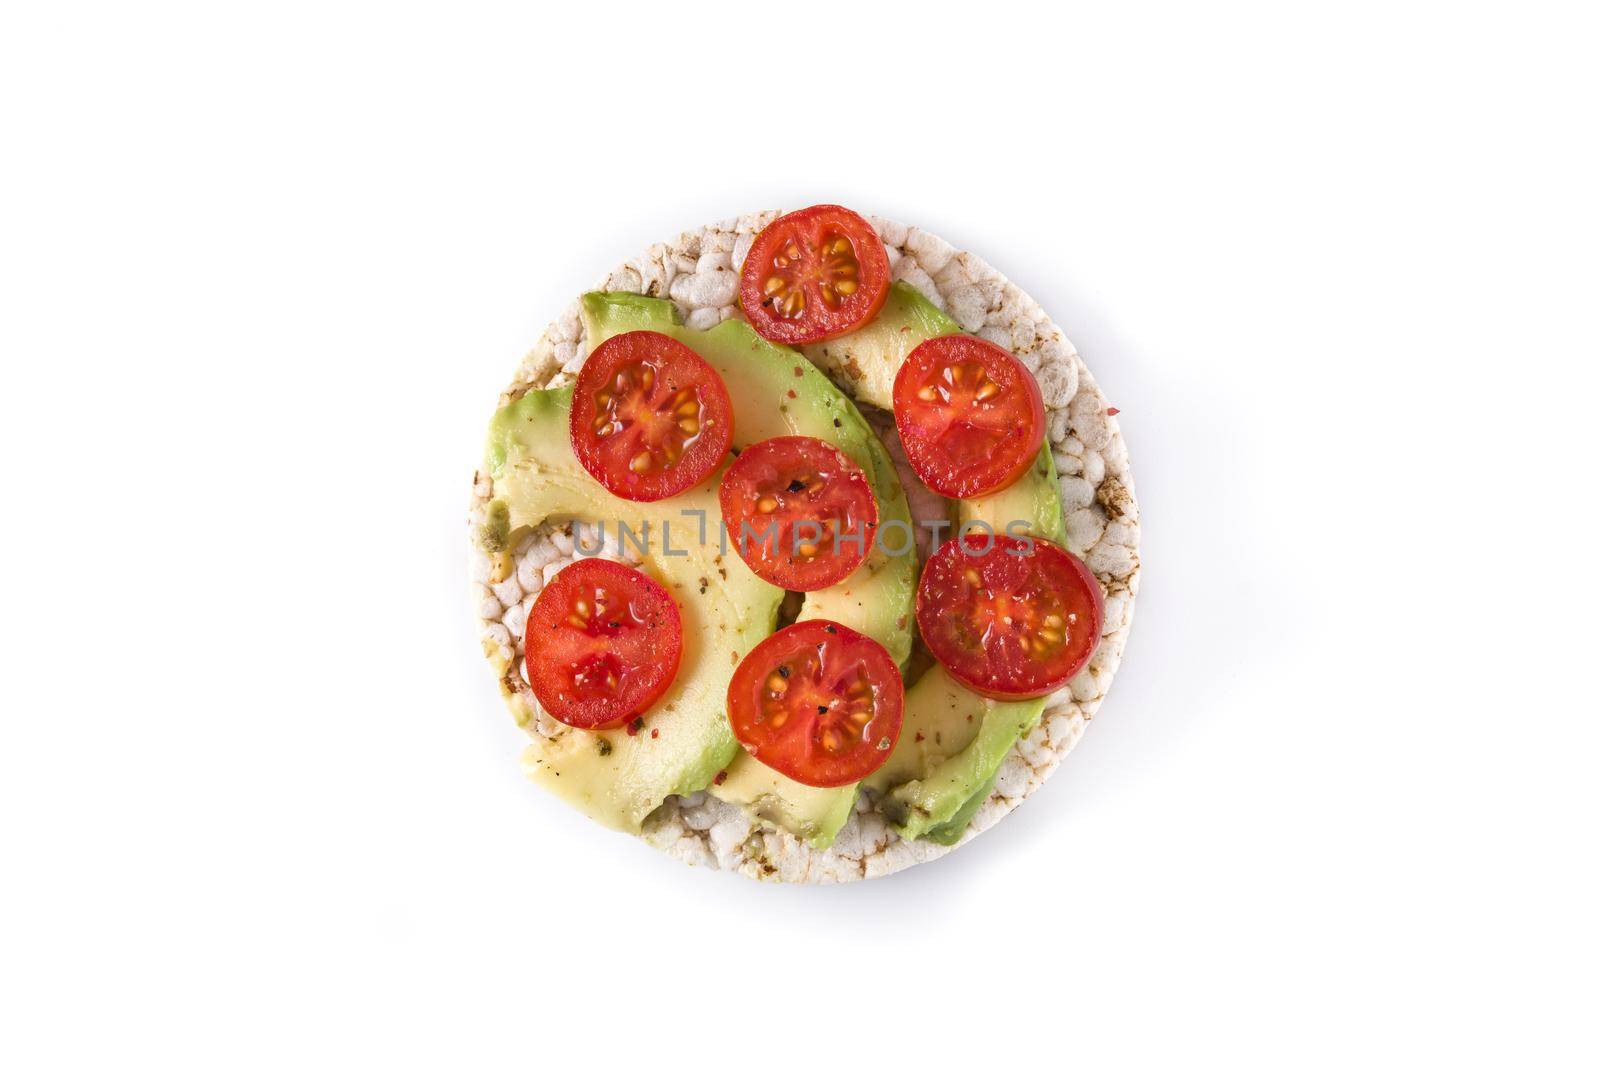 Puffed rice cake with tomatoes and avocado isolated on white background